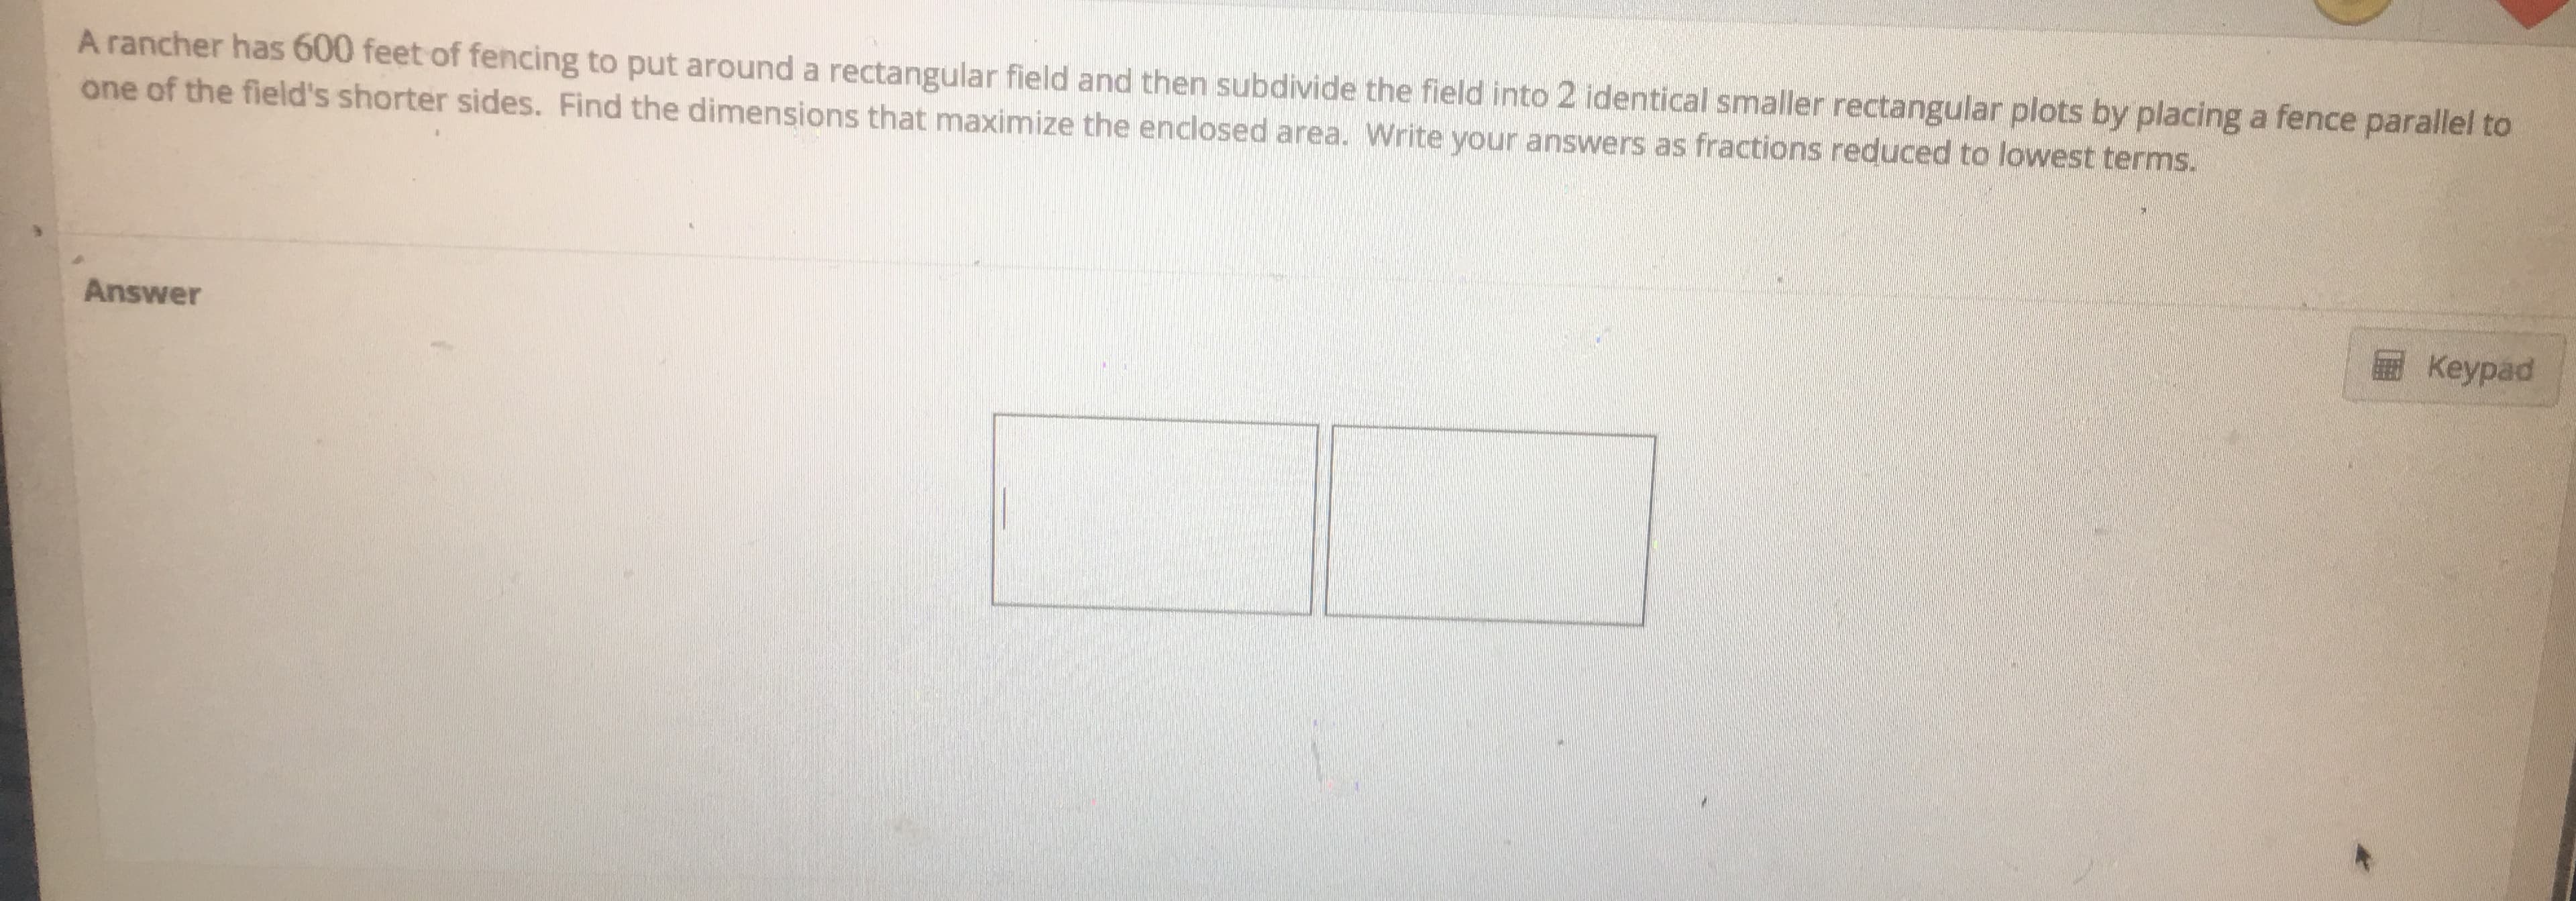 A rancher has 600 feet of fencing to put around a rectangular field and then subdivide the field into 2 identical smaller rectangular plots by placing a fence parallel to
one of the field's shorter sides. Find the dimensions that maximize the enclosed area. Write your answers as fractions reduced to lowest terms.
Keypad
Answer
